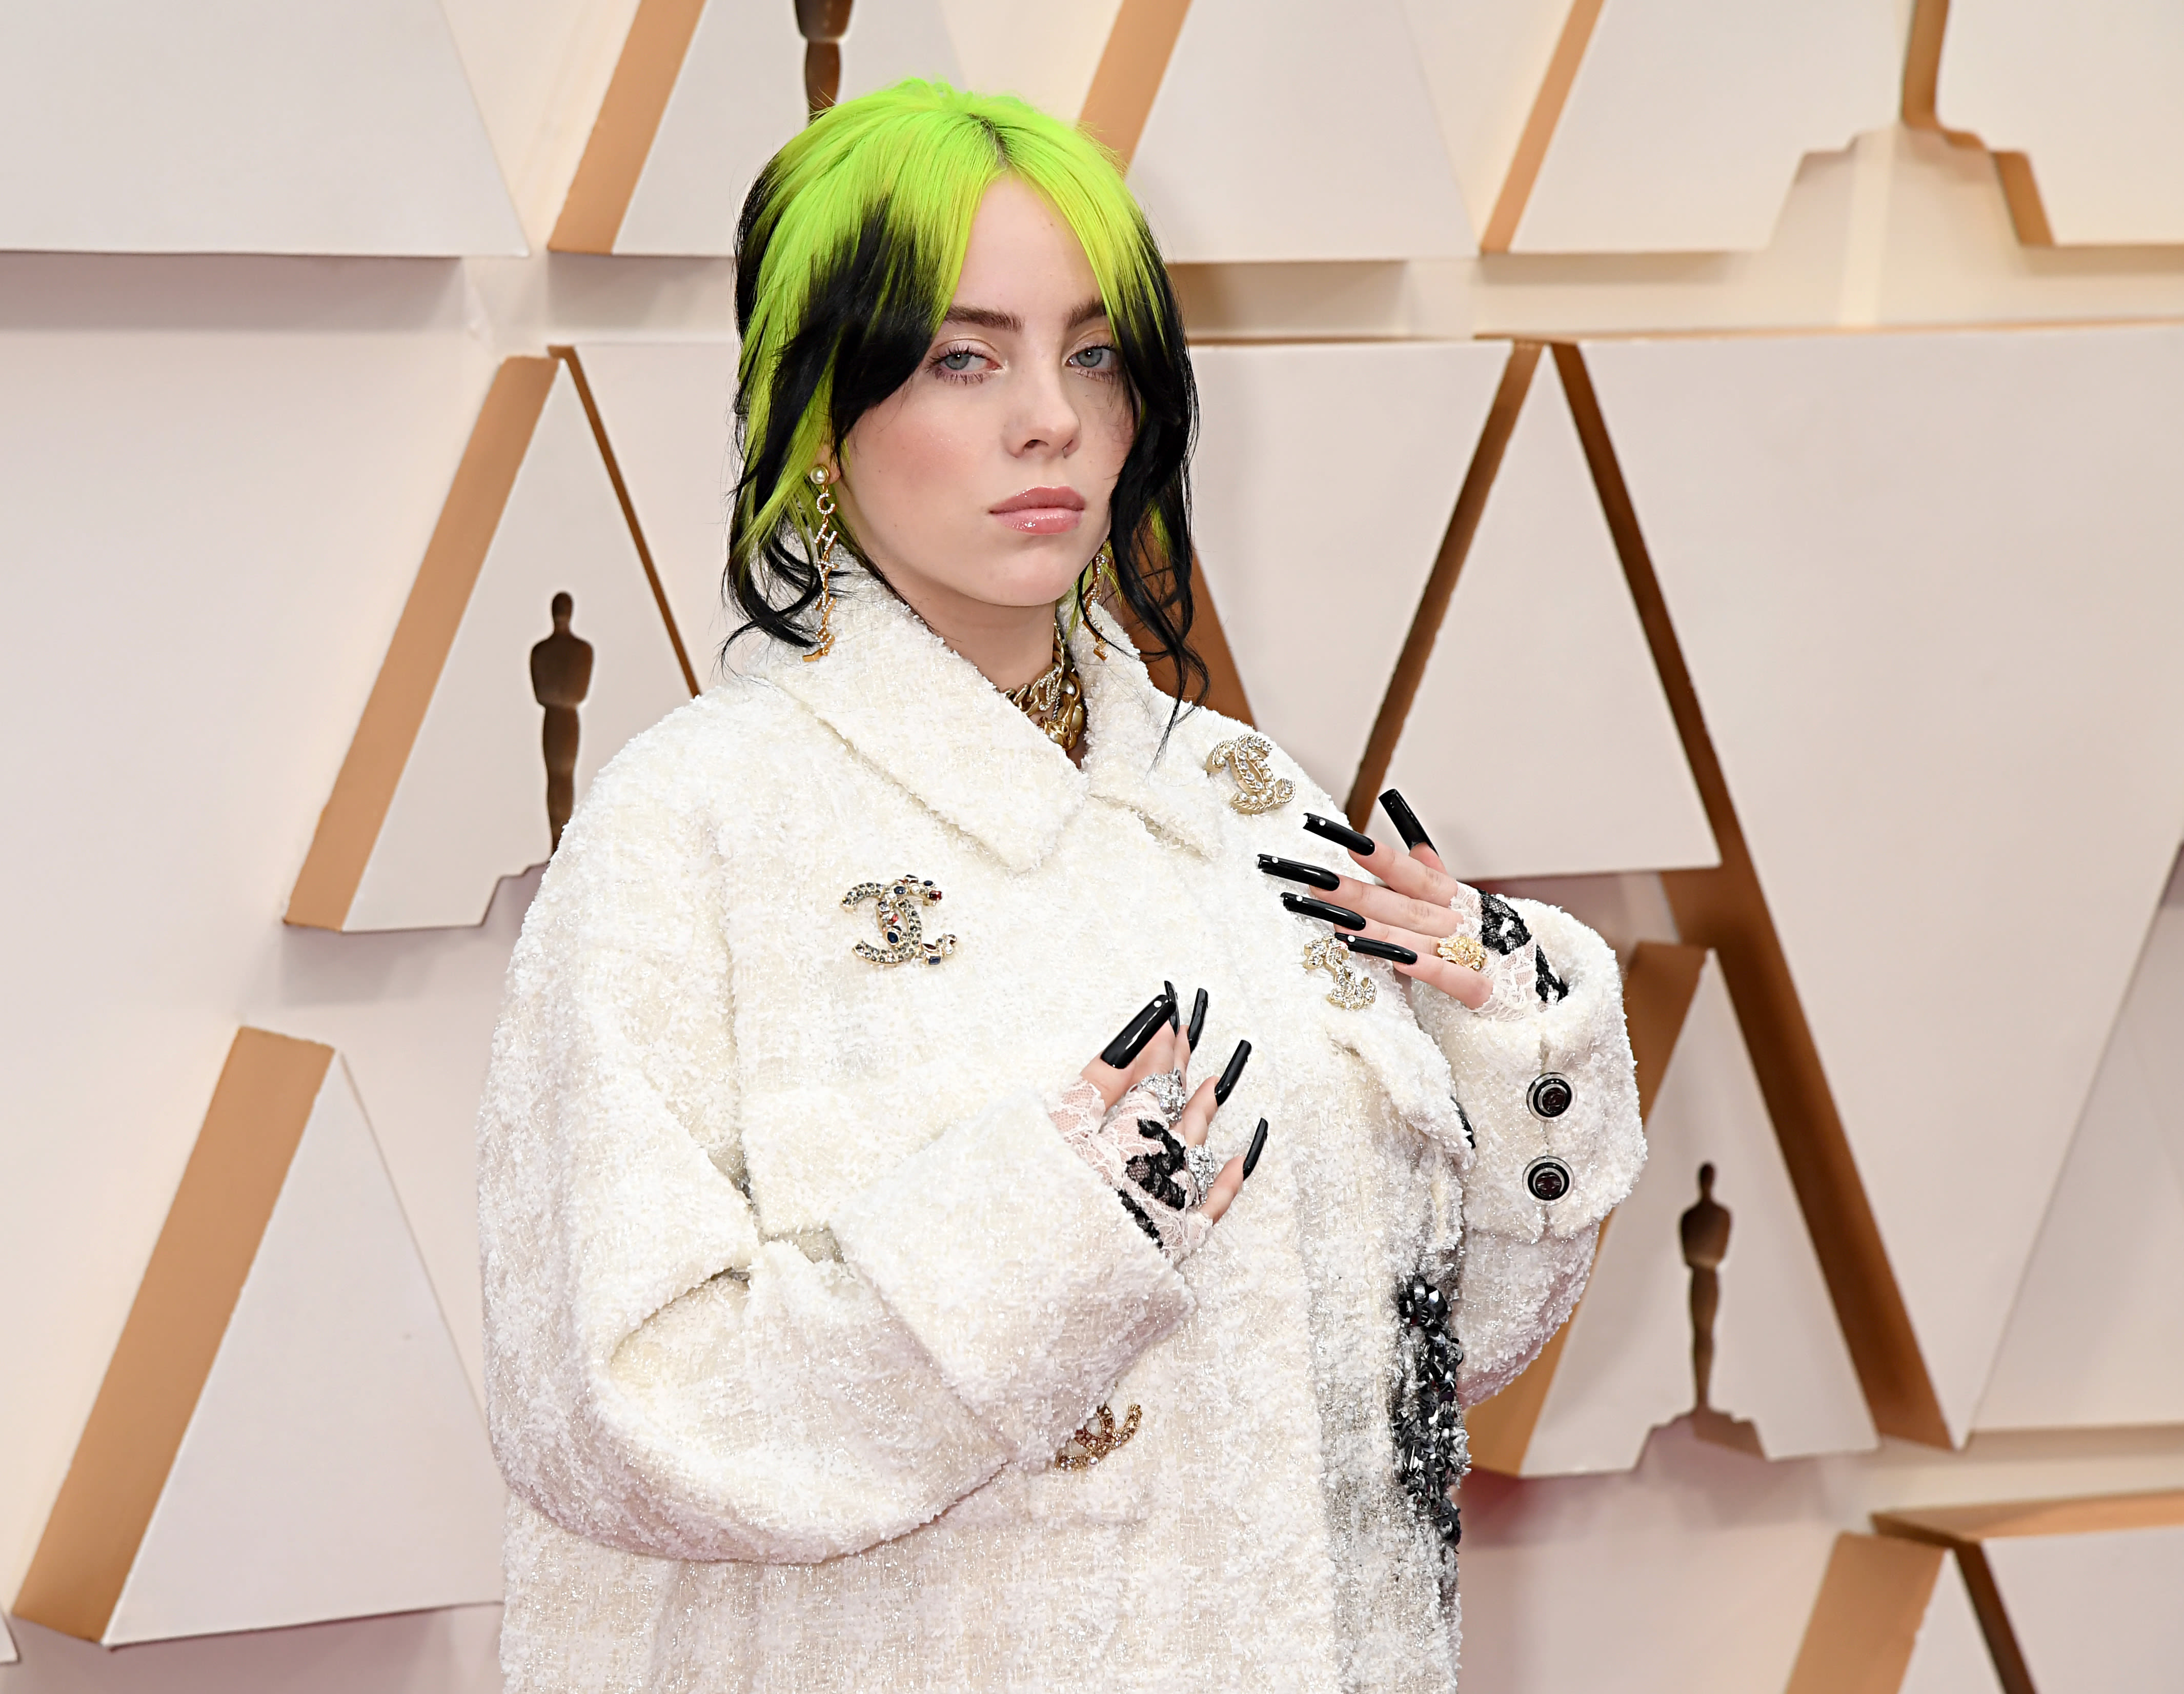 Why Everyone Has Always Been Obsessed With Billie Eilish’s Fashion